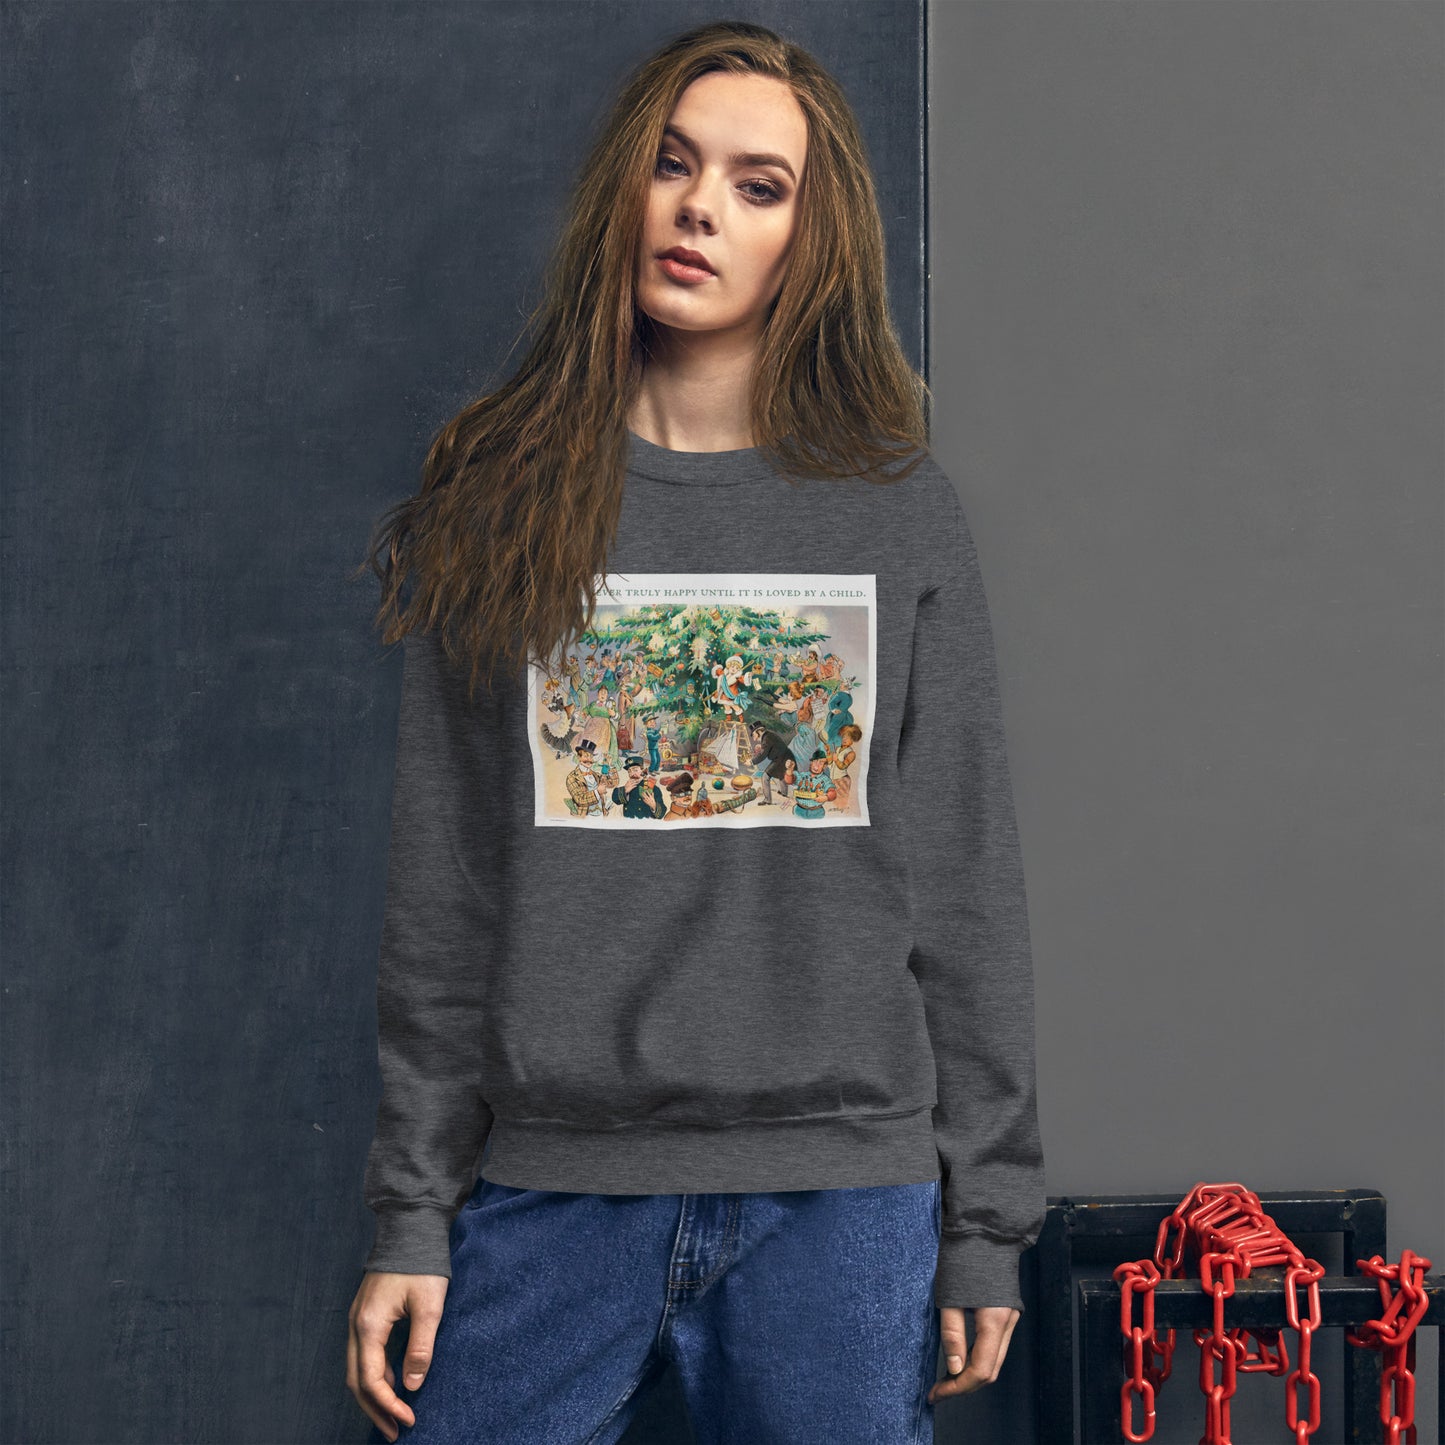 A Toy is Never Truly Happy Until it is Loved by a Child Short-Sleeve Unisex Sweatshirt, Vintage Image 1902